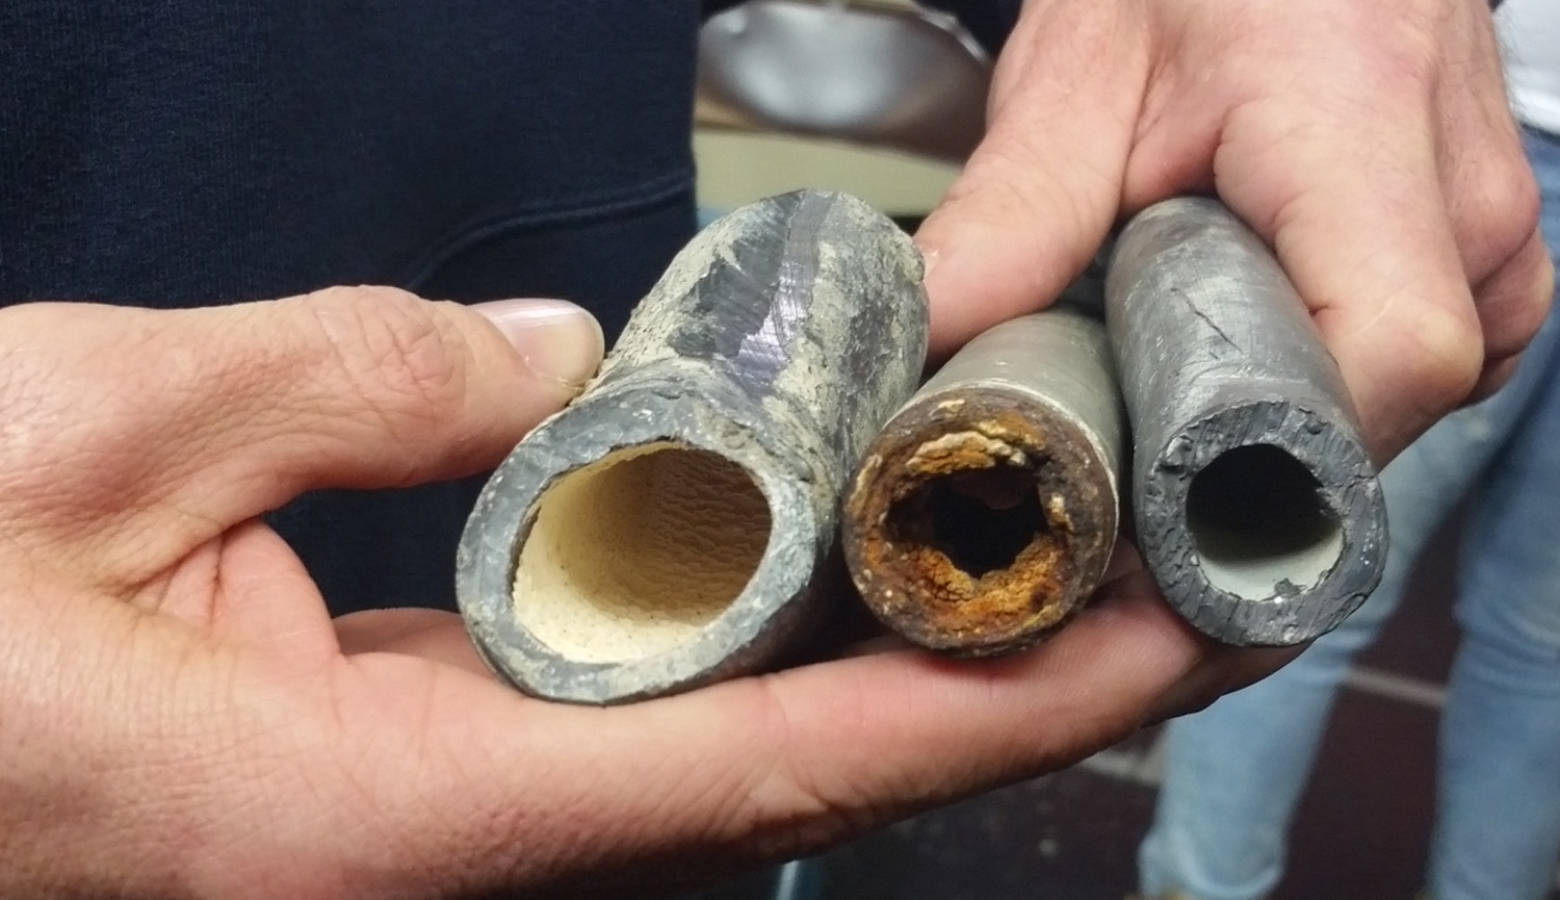 EPA project manager Robert Durno demonstrates the visual difference between orthophosphate-coated lead pipes, corroded lead pipes, and lead pipes with their original coating. (Lauren Chapman/IPB News)